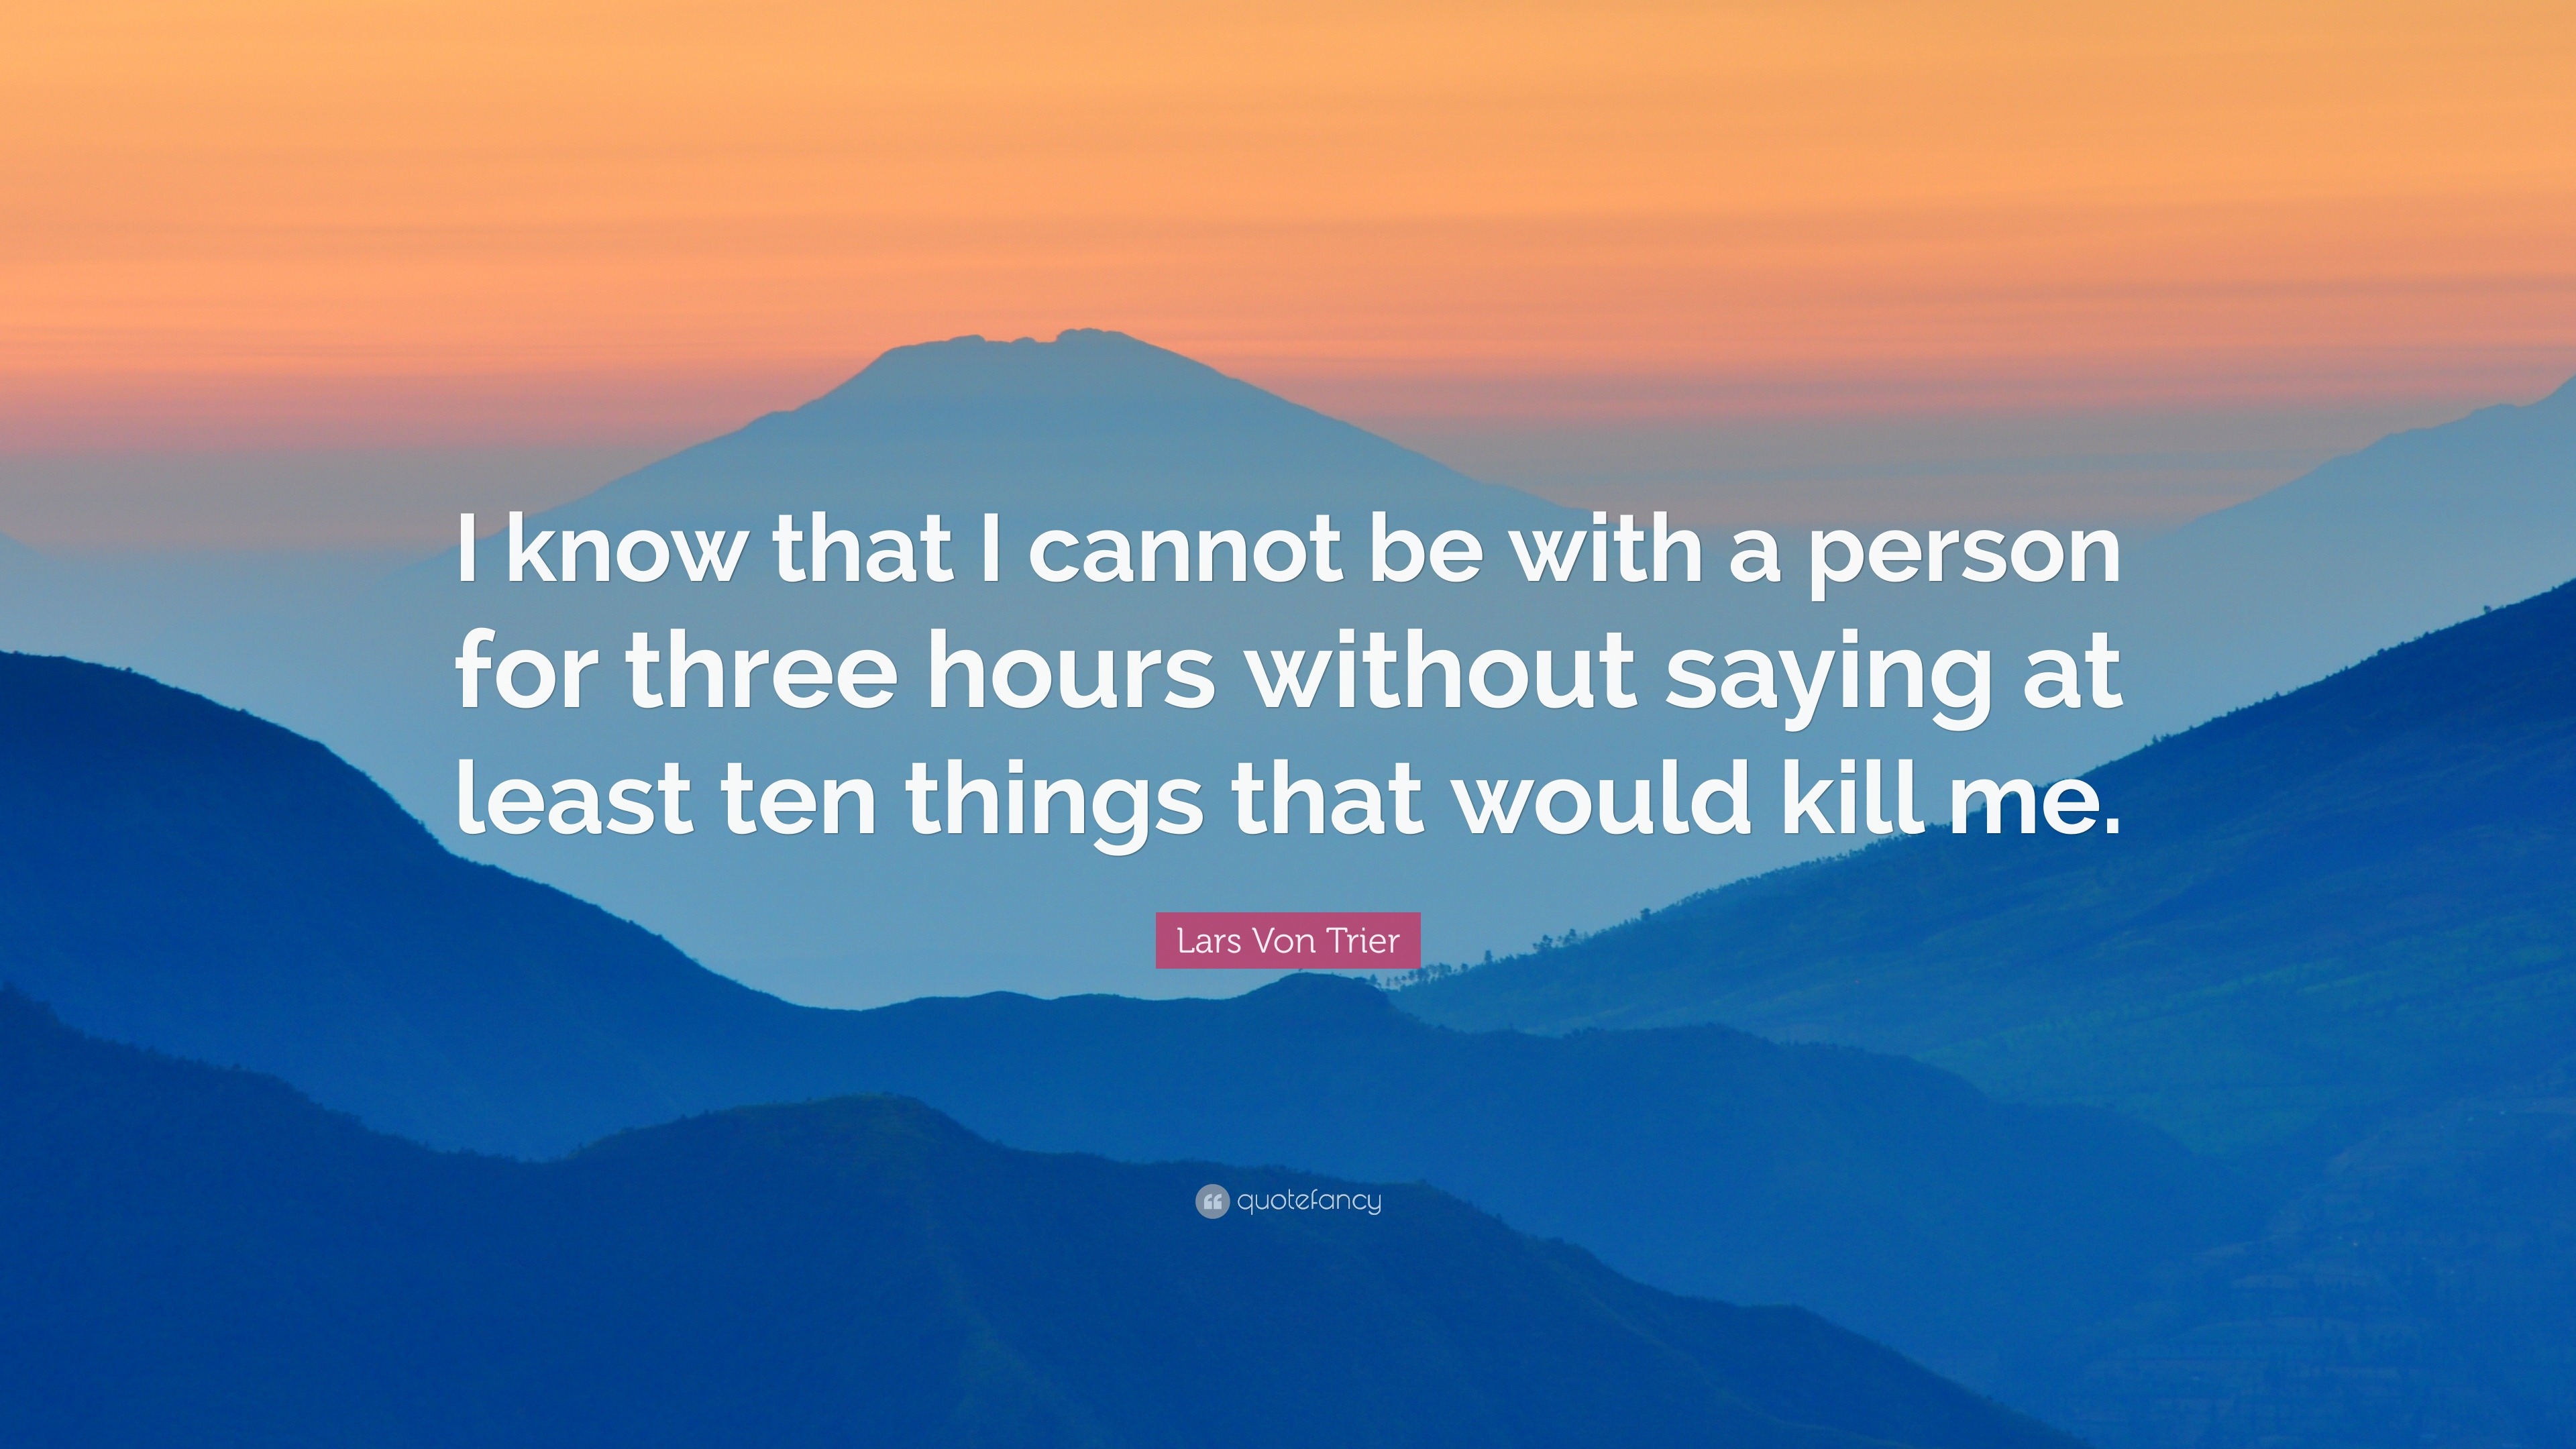 Lars Von Trier Quote: “I know that I cannot be with a person for three ...